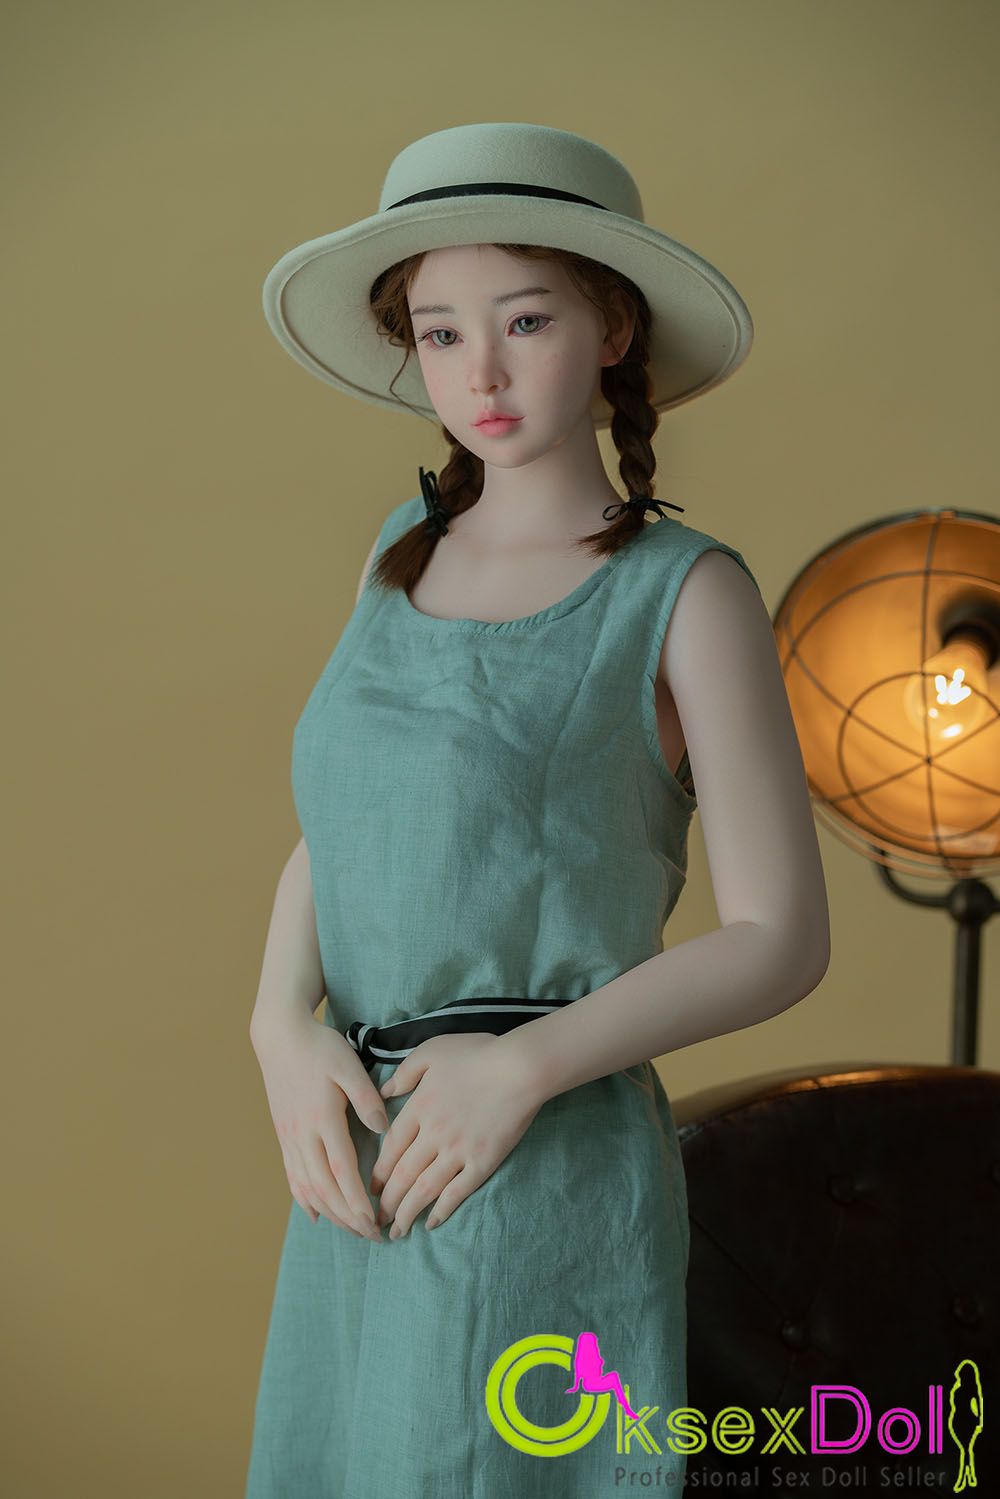 Flat Chested Silicone Doll Photos